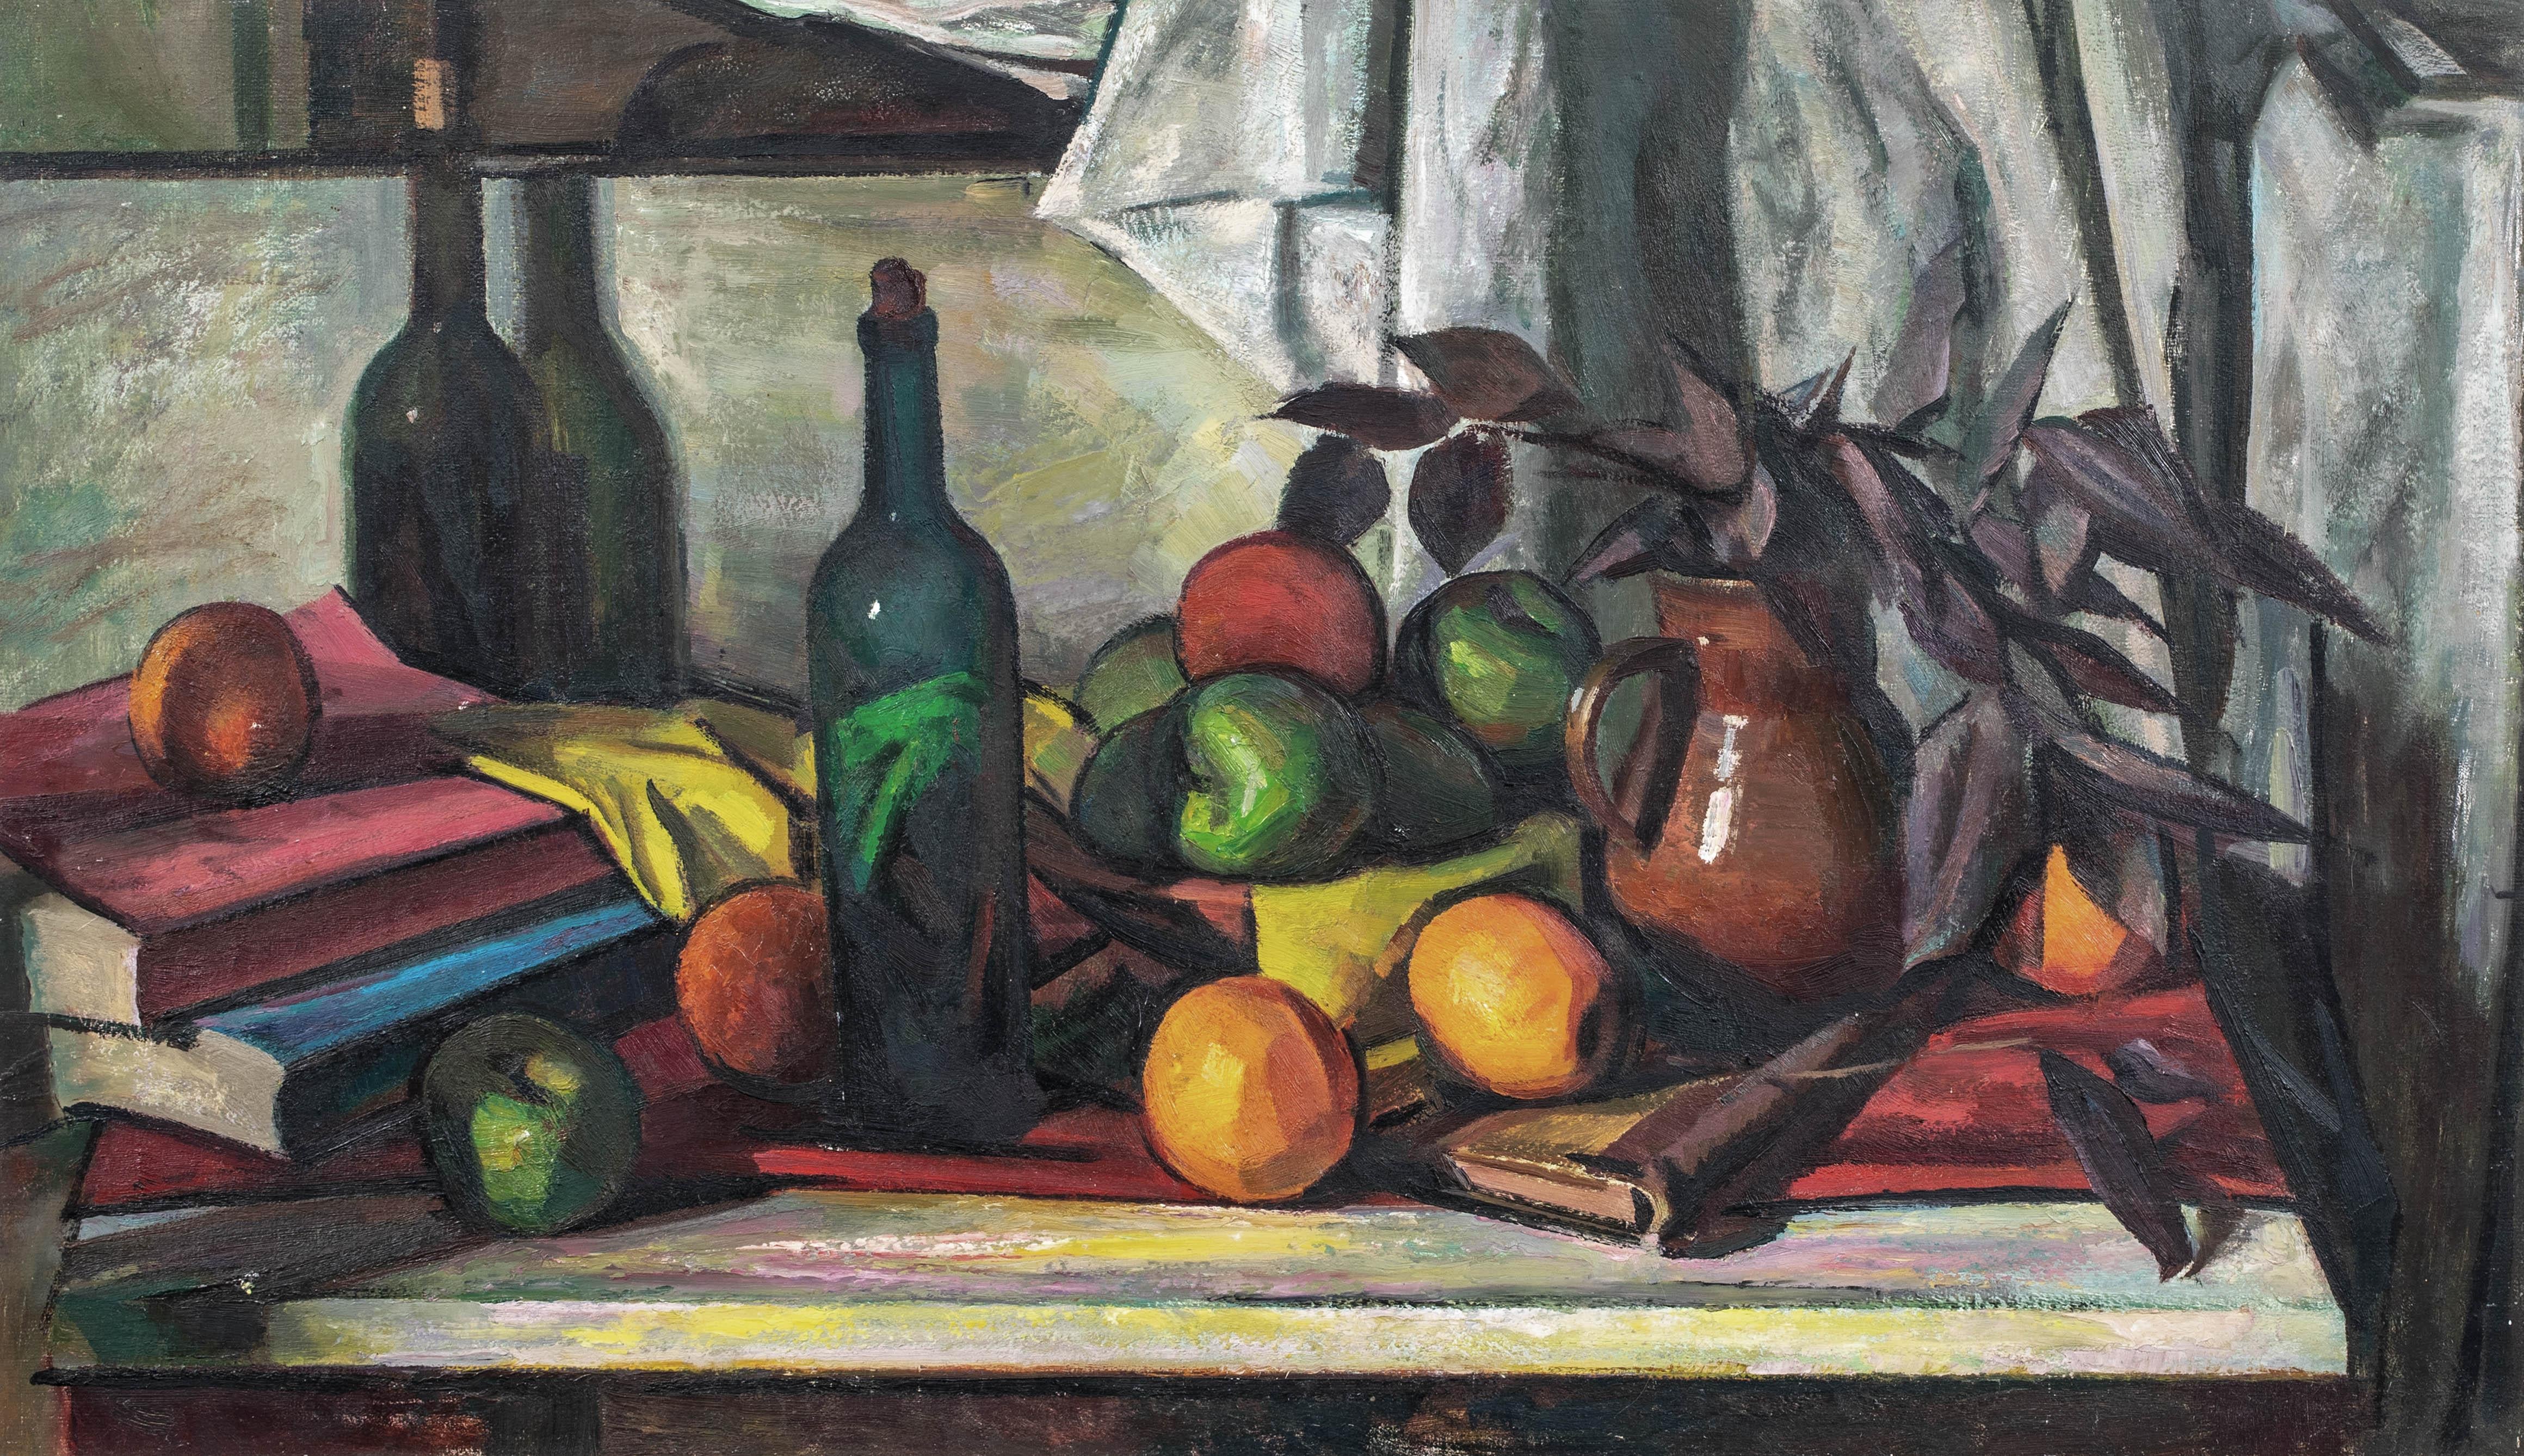 Unknown Still-Life Painting - "Livres, Boutielle Et Fruits", circa 1900  